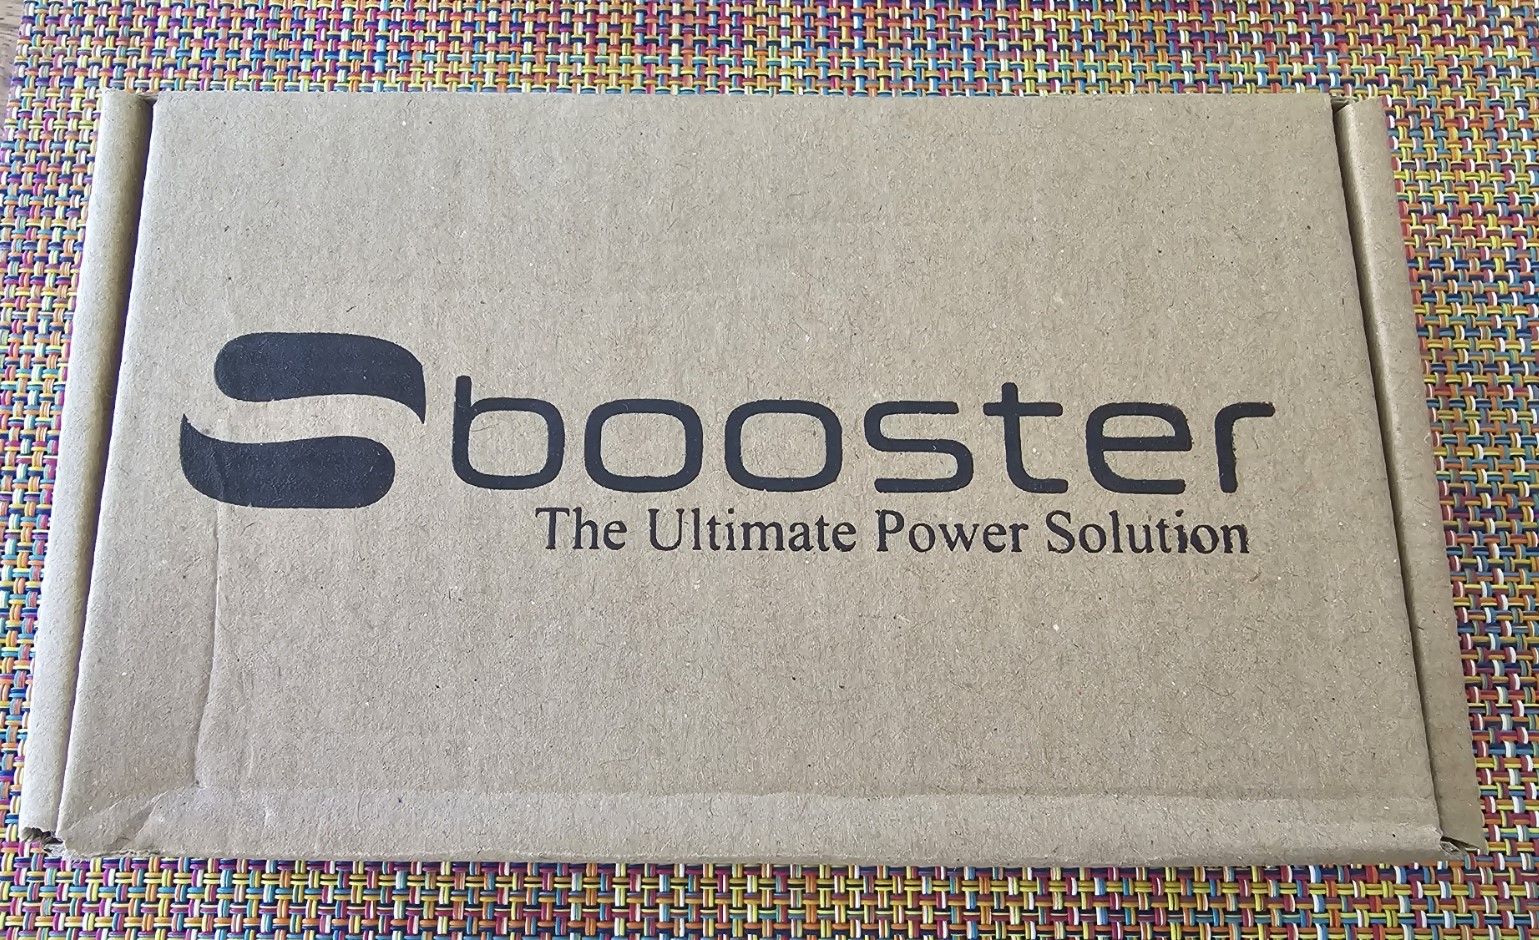 Brand New : Sbooster BOTW P&P ECO MKII Power Supply (12...